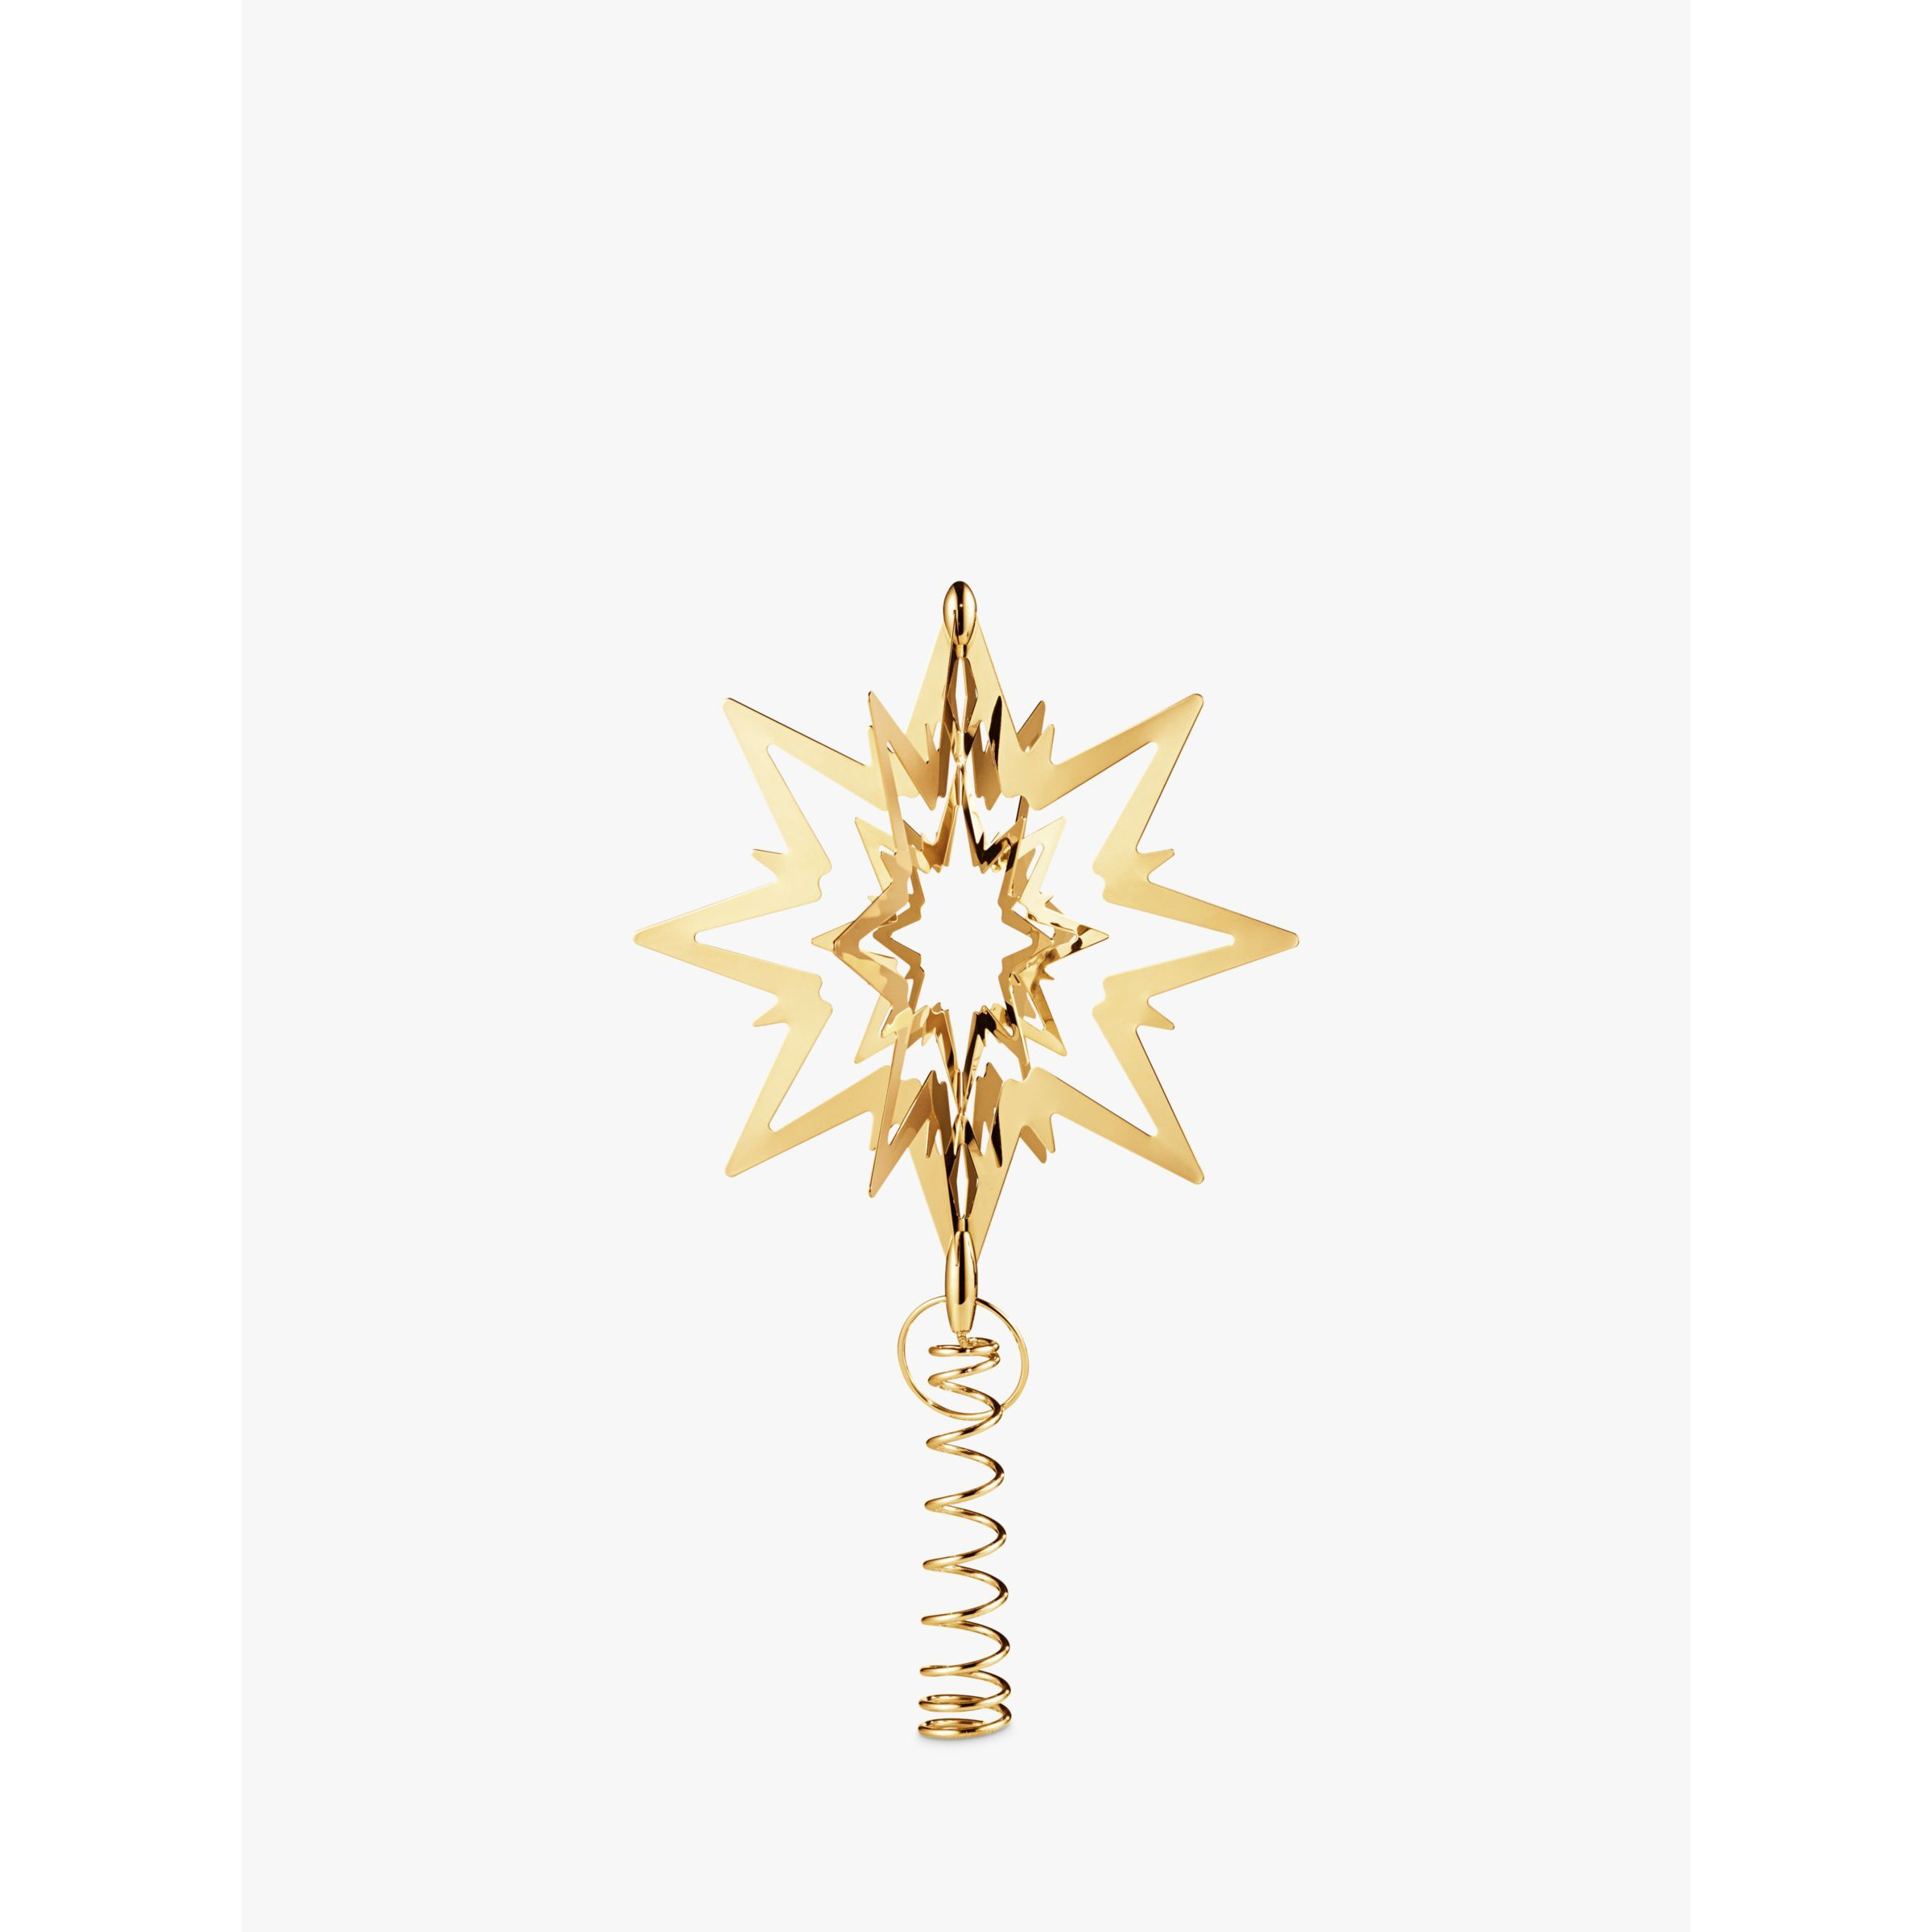 Georg Jensen Gold-Plated Star Christmas Tree Top Decoration, Small - image 1